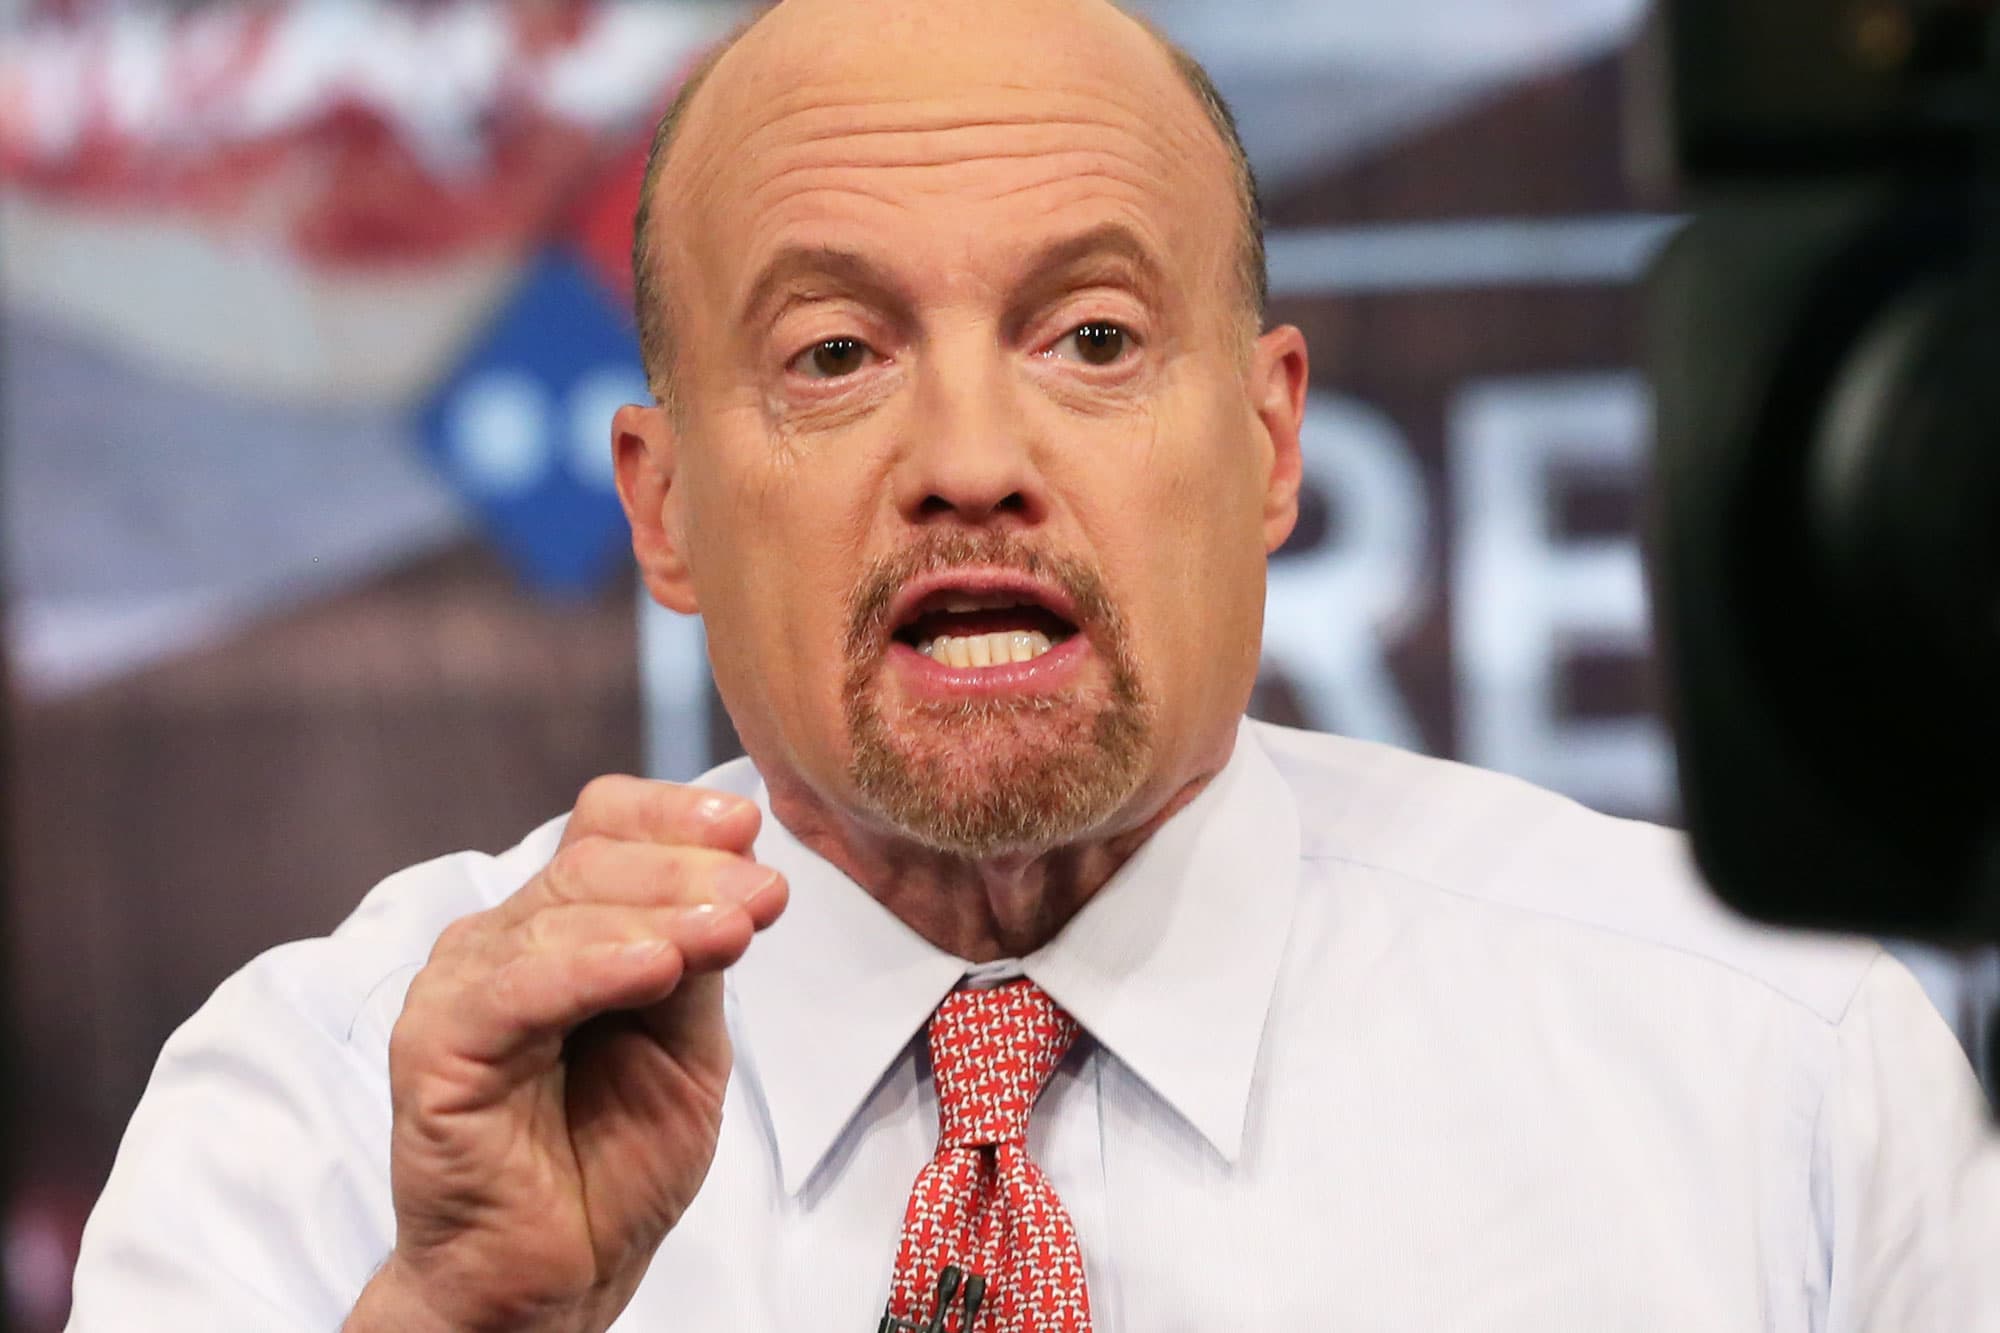 Jim Cramer expects some causes of inflation ‘to get worse’ before improving